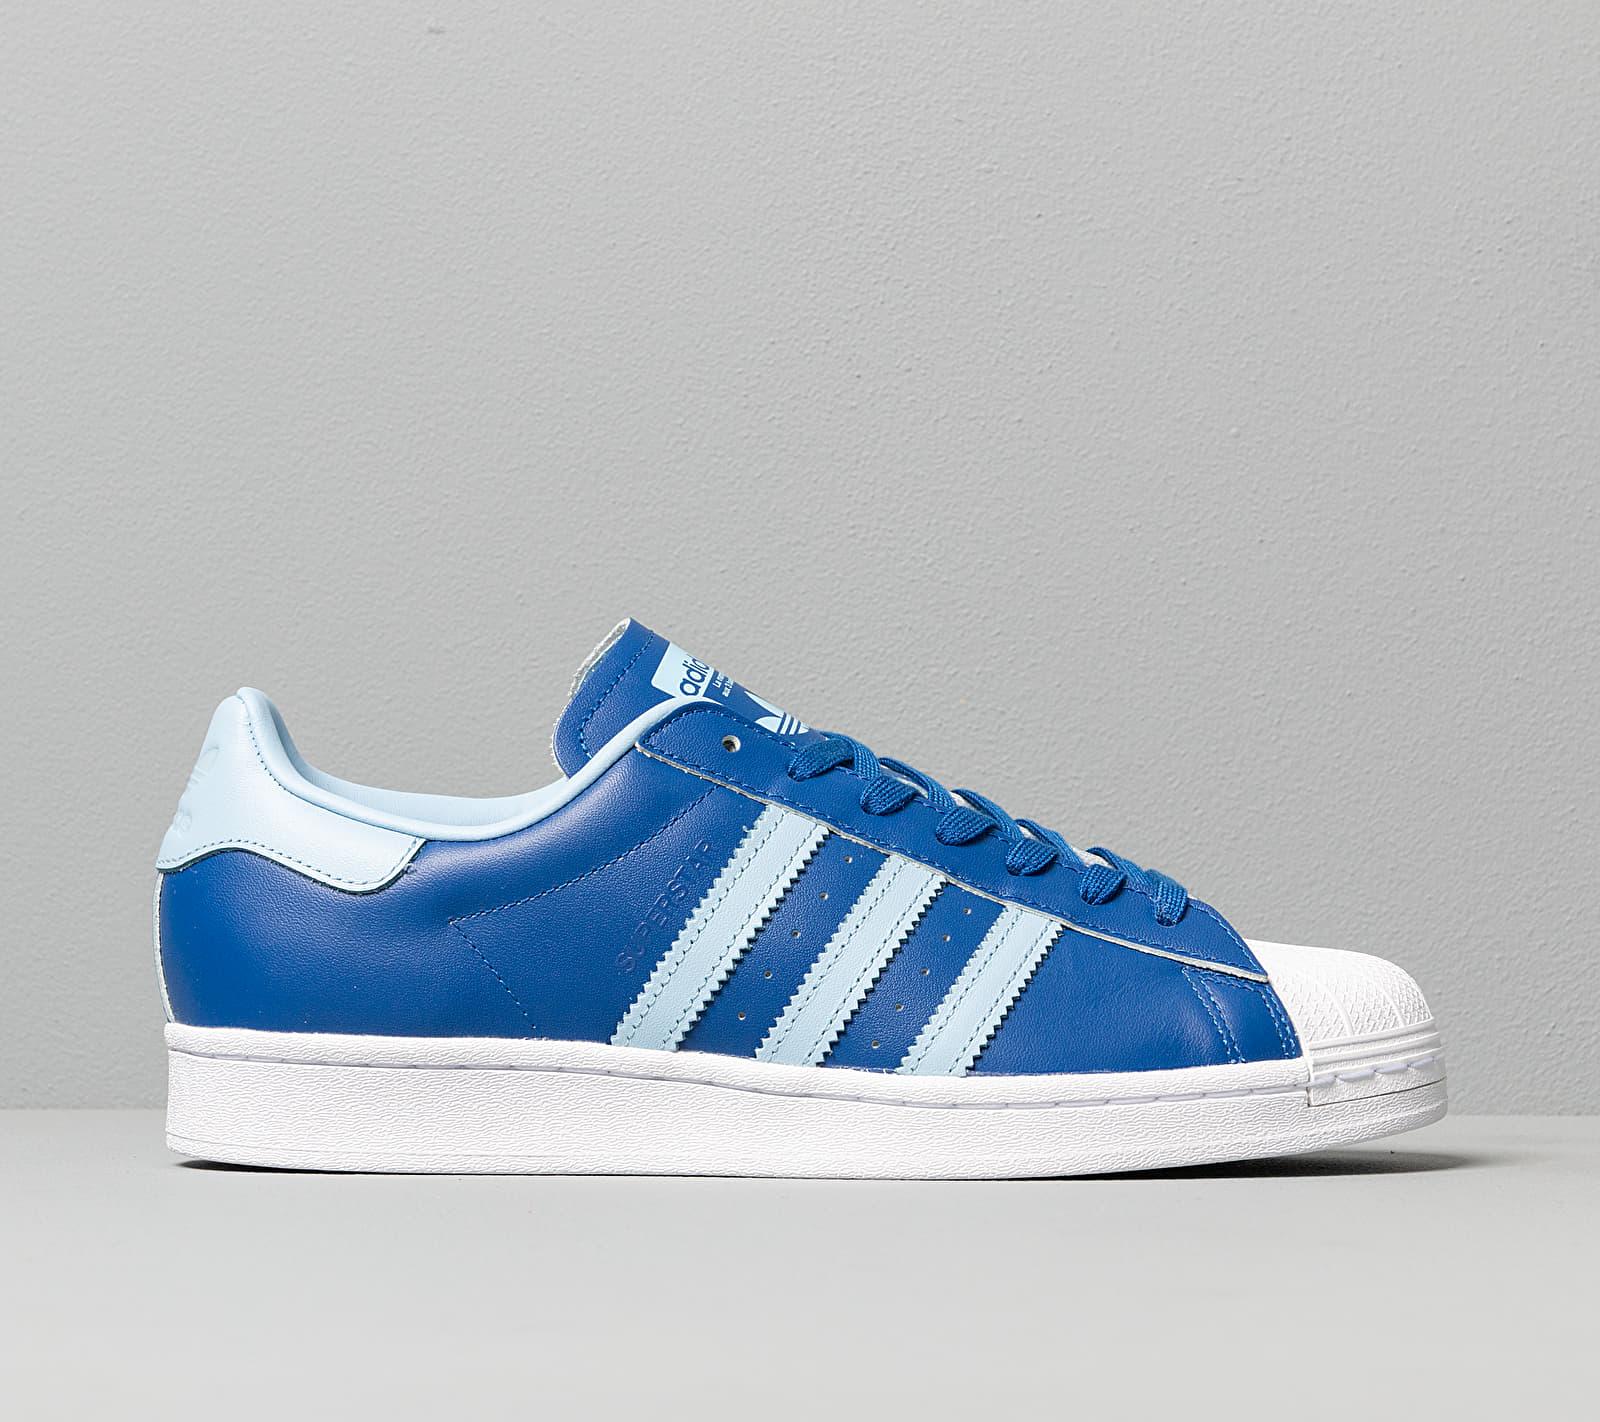 adidas Originals Adidas Superstar Core Royal/ Clear Sky/ Ftw White in Blue  for Men - Lyst